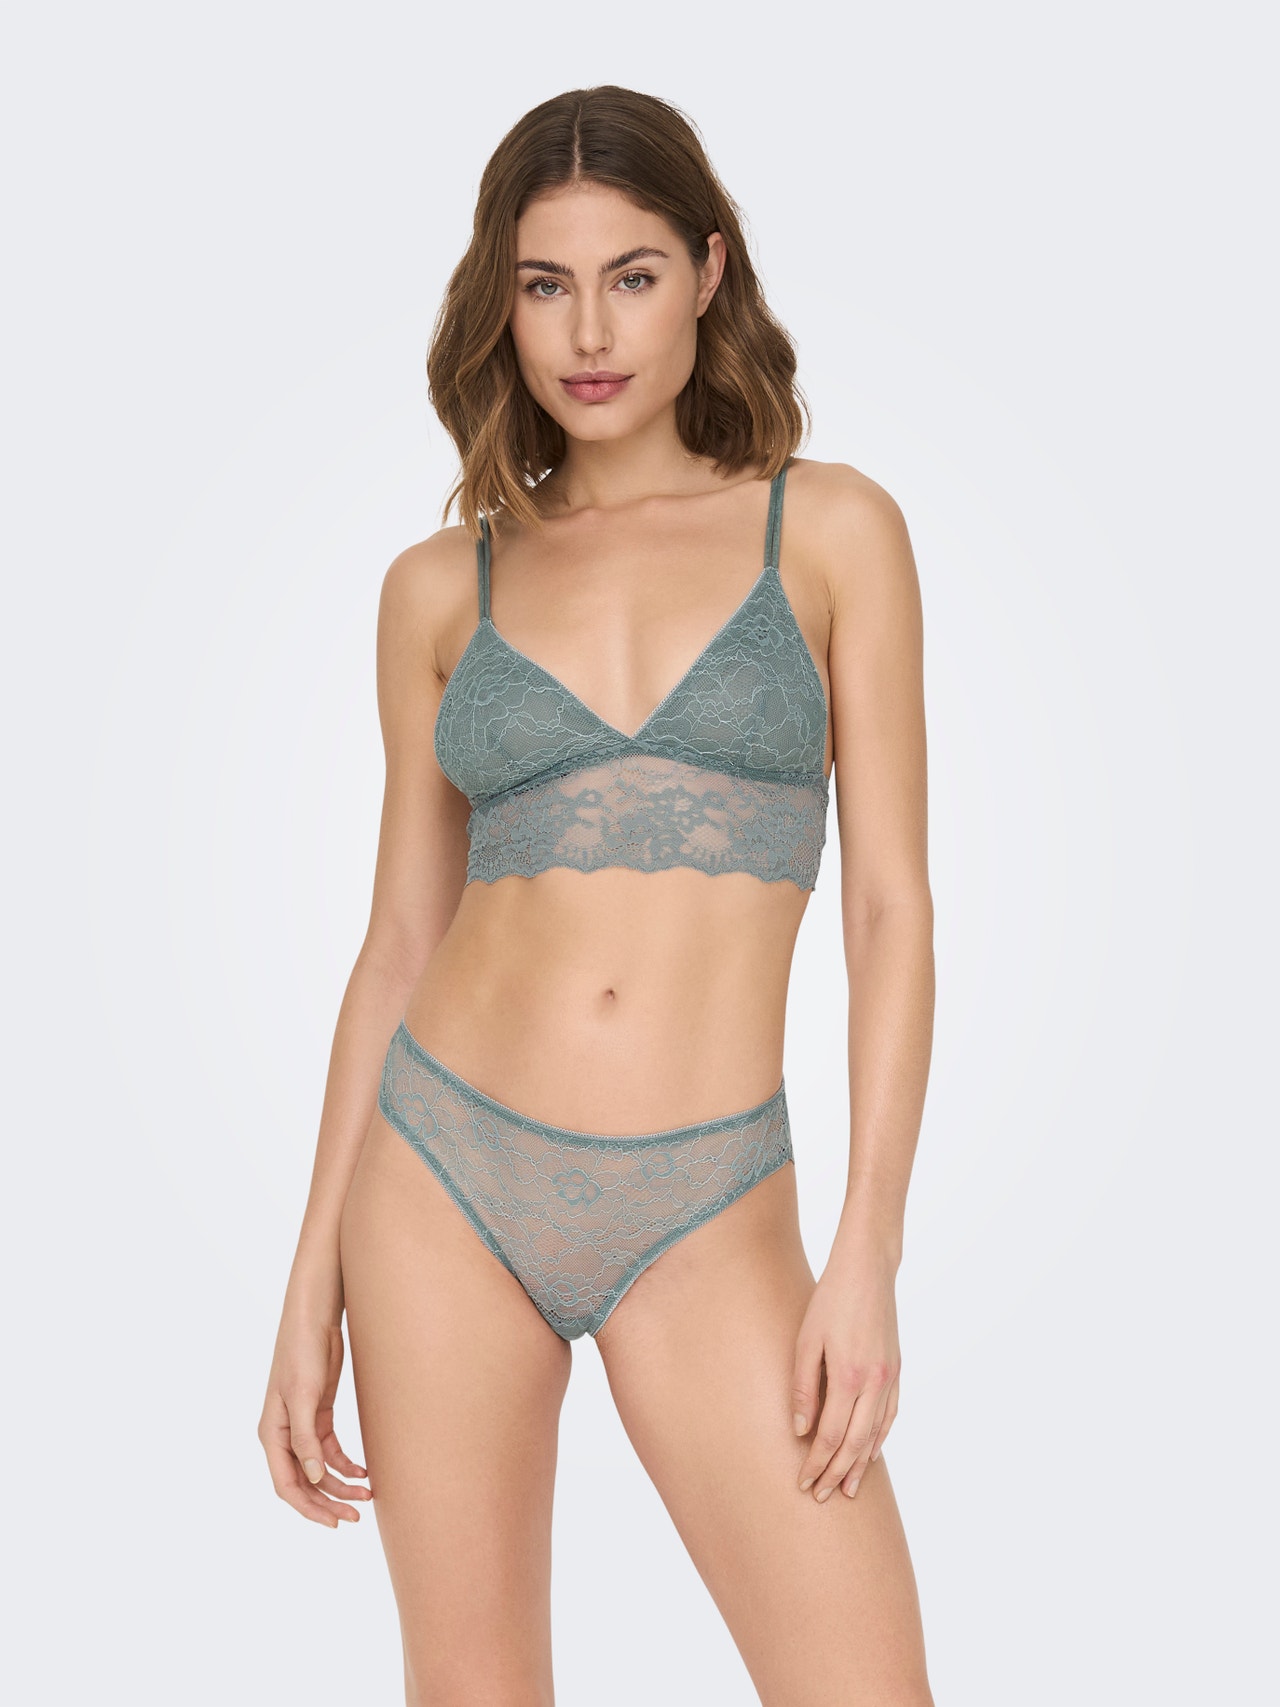 ONLY Lace Bra -Stormy Sea - 15280854